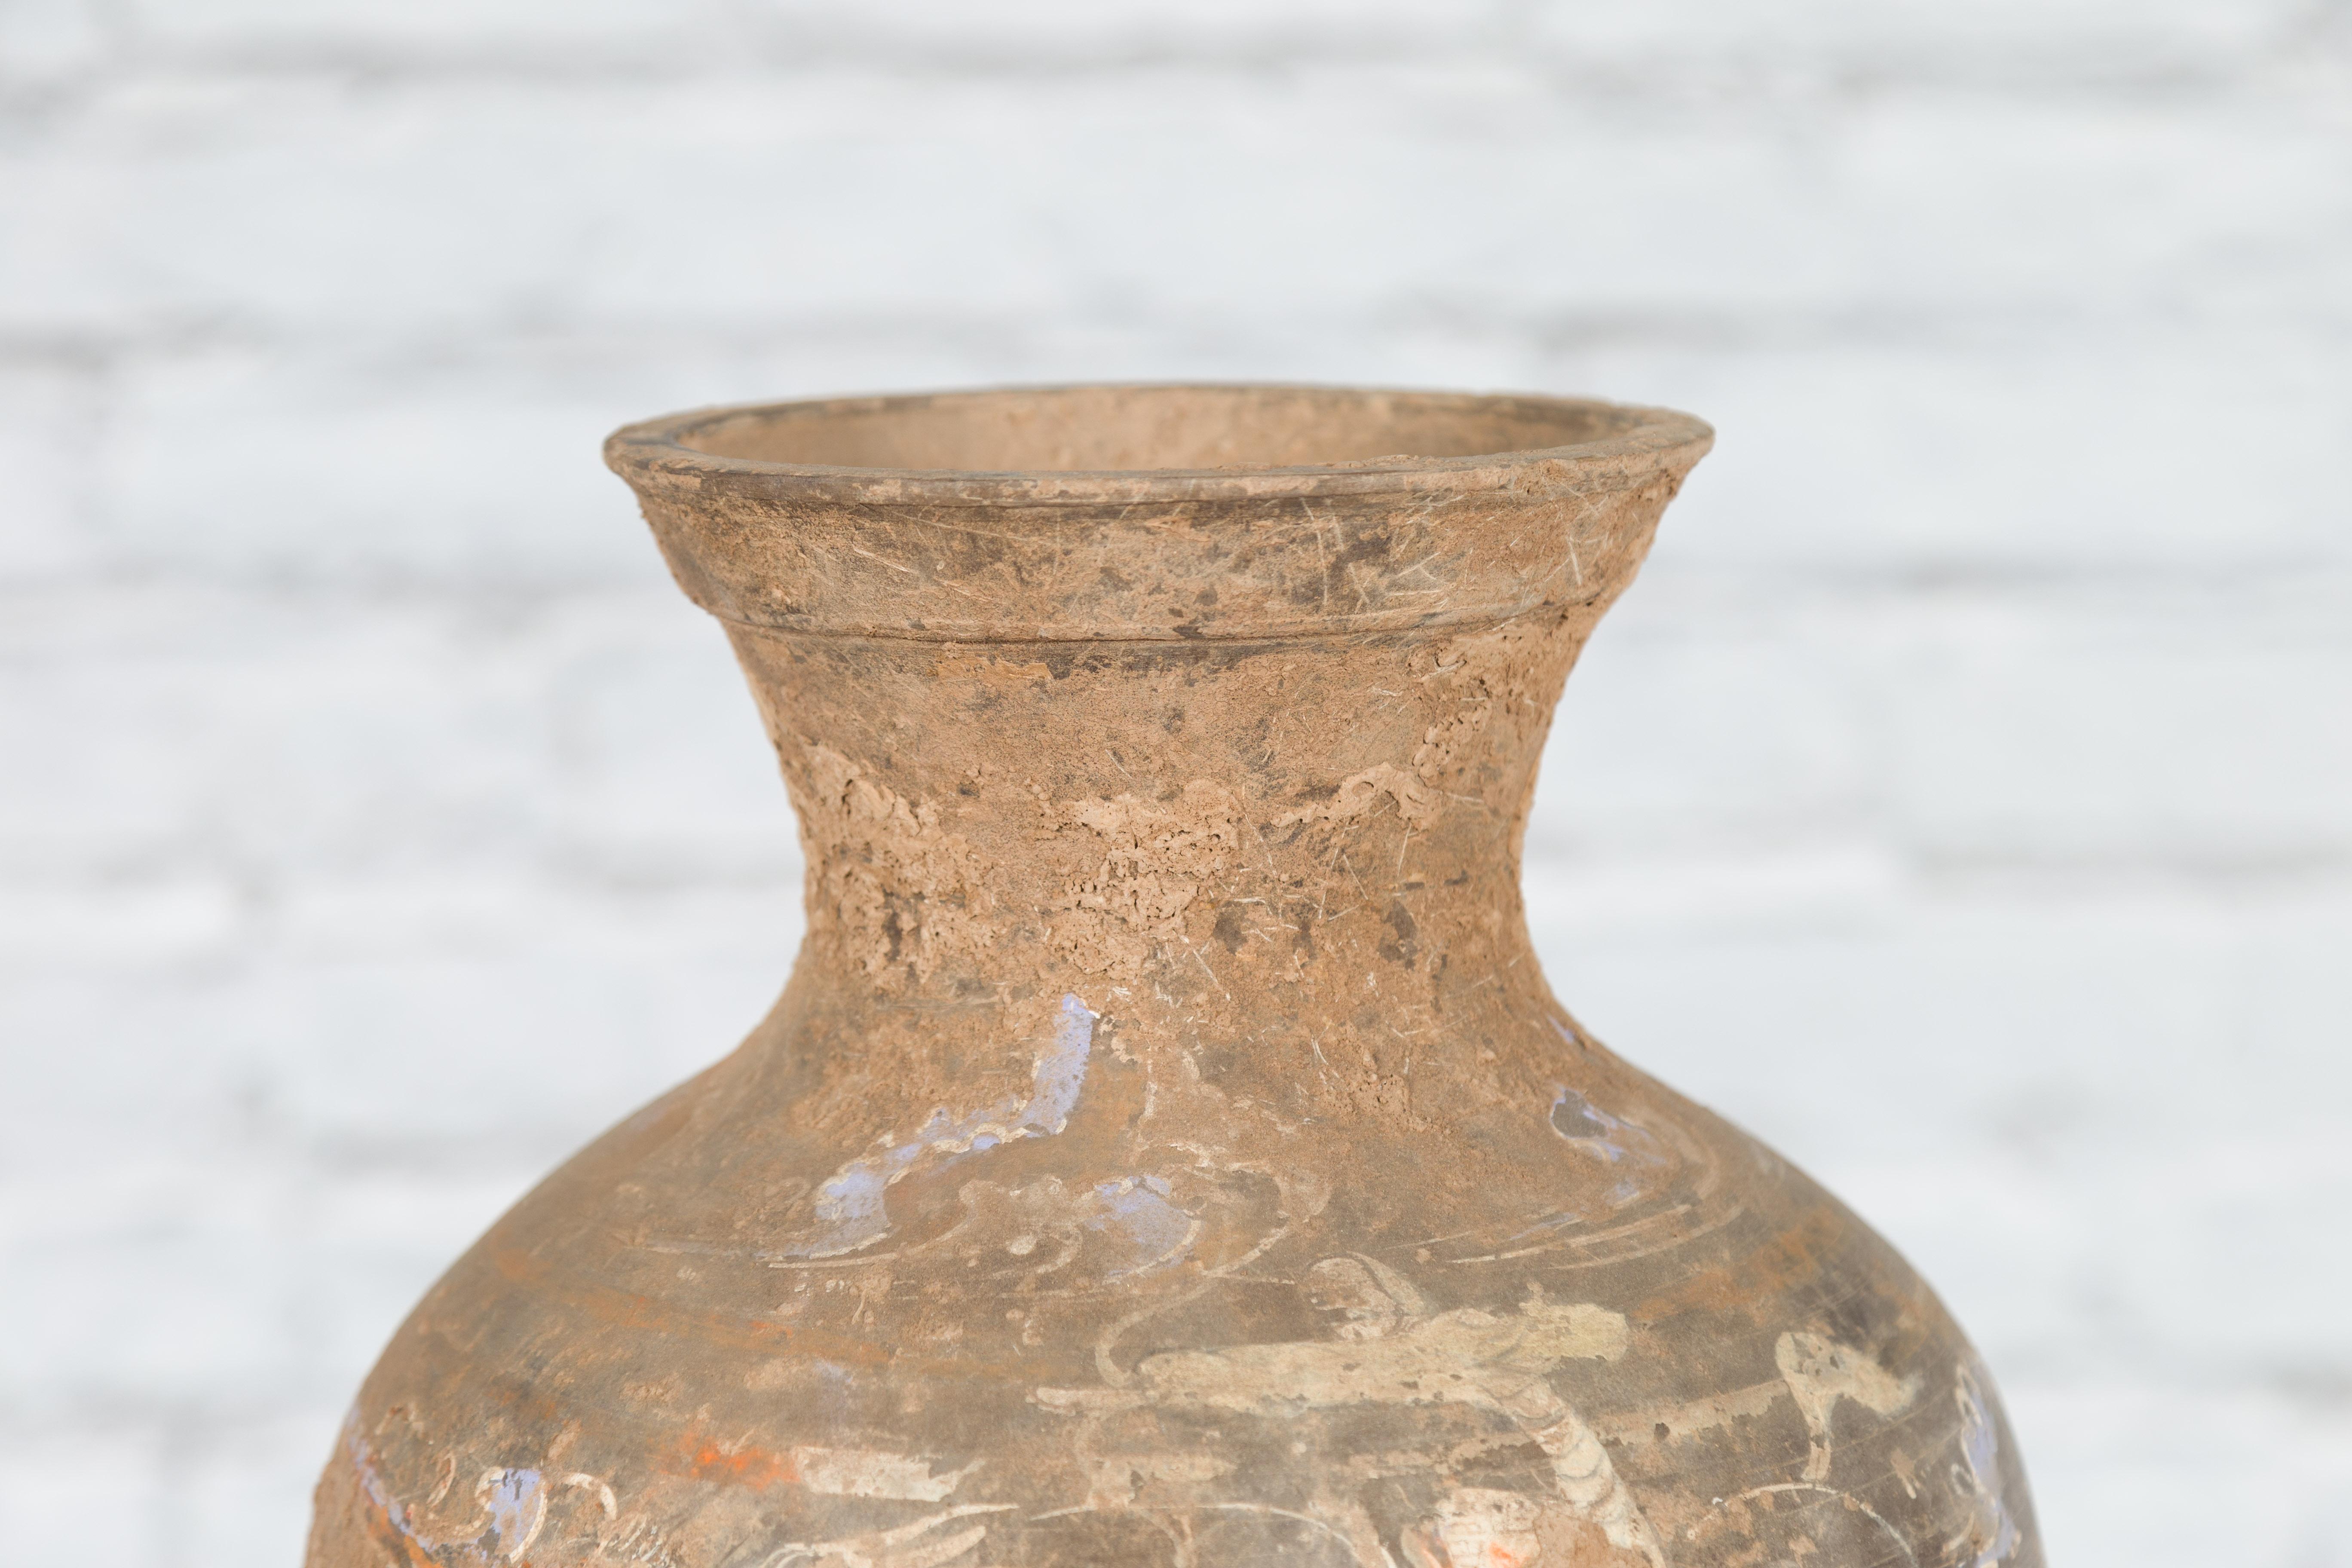 Chinese Han Dynasty Terracotta Vase with Hand-Painted Décor, circa 202 BC-200 AD 1